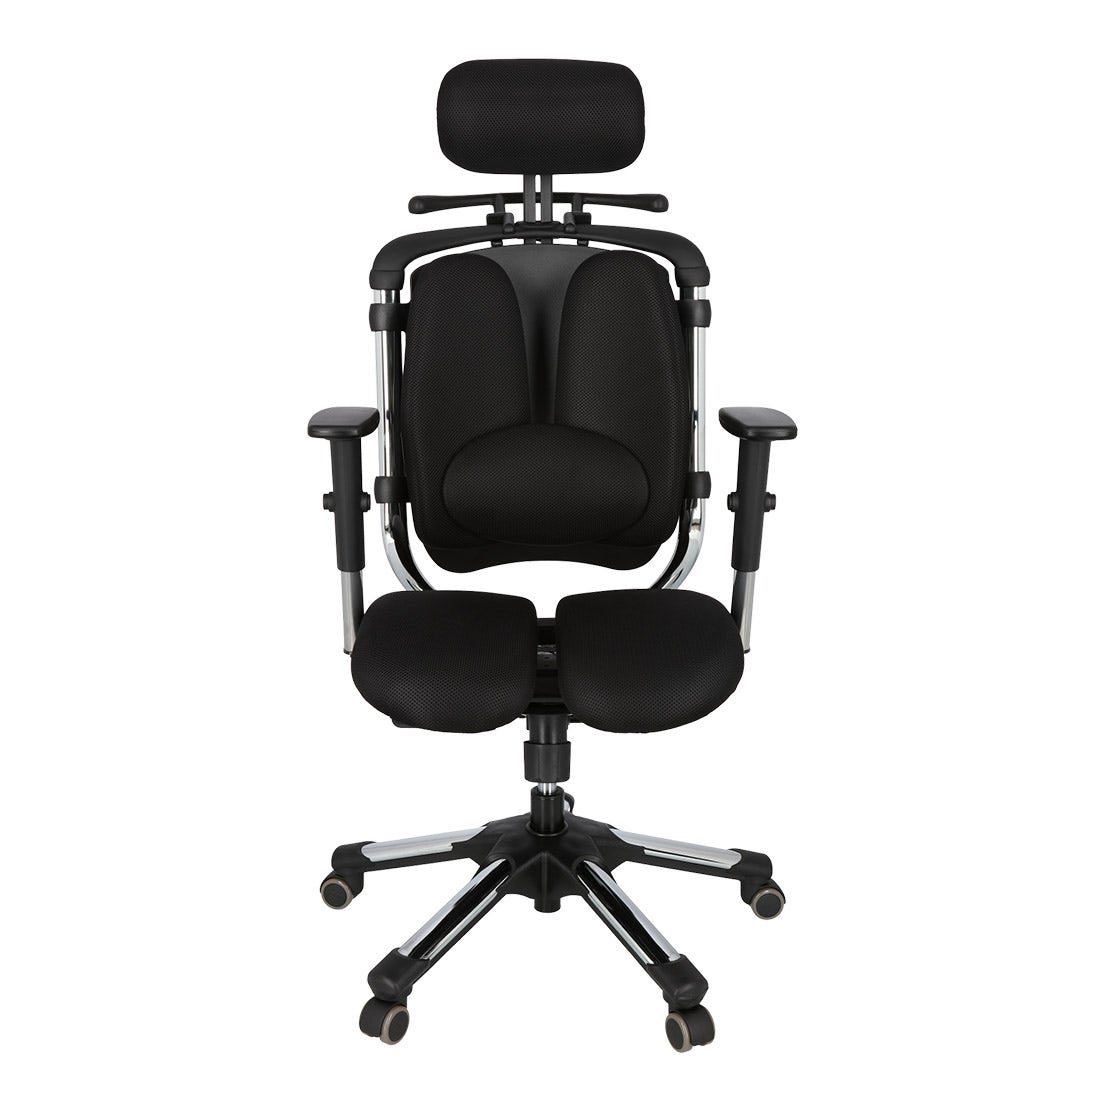 39014946-furniture-home-office-gaming-office-chair-01